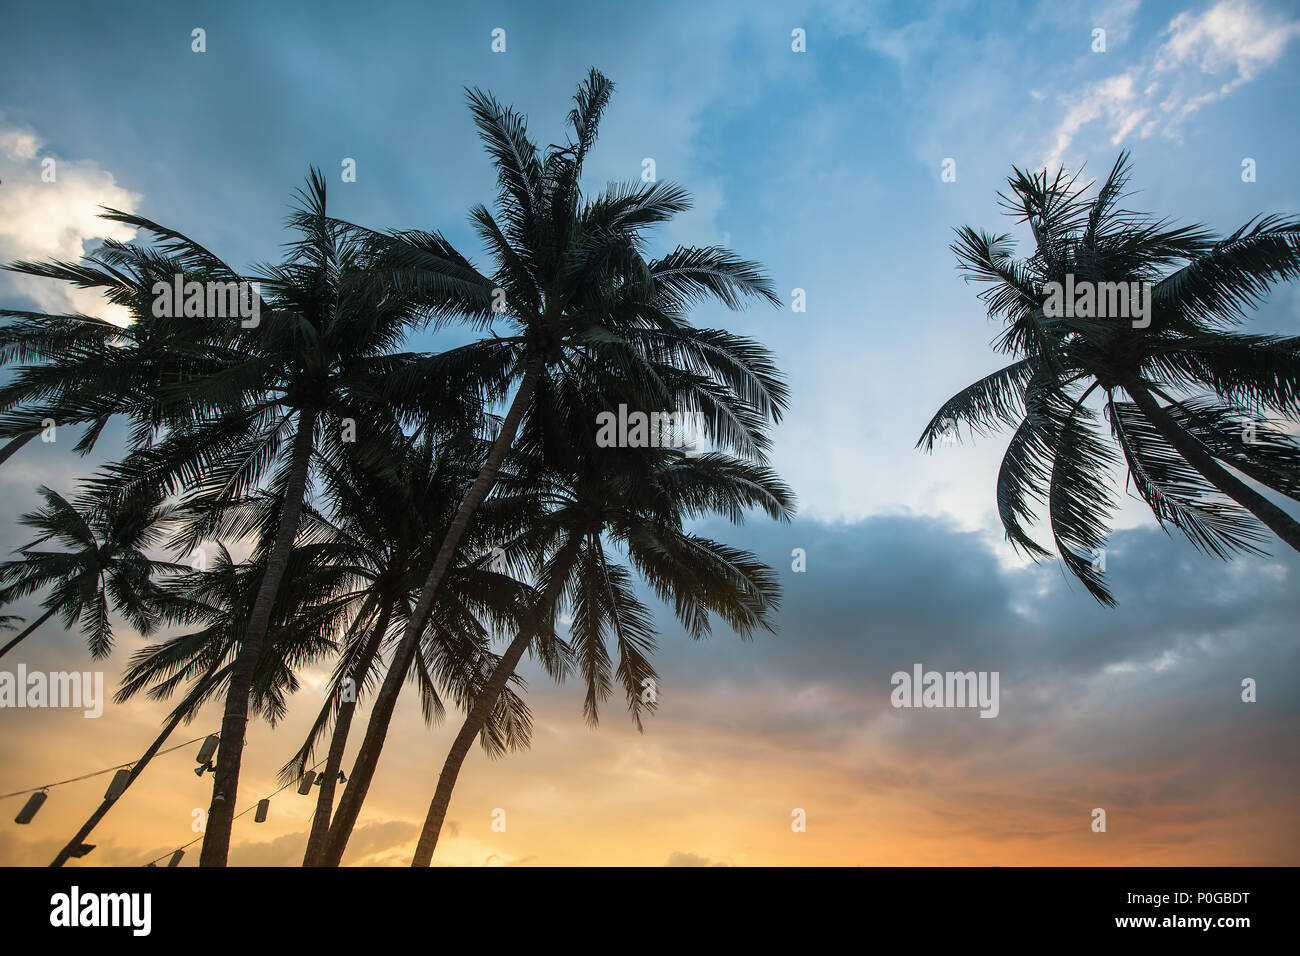 Palm trees silhouetted against sky at sunset. Stock Photo